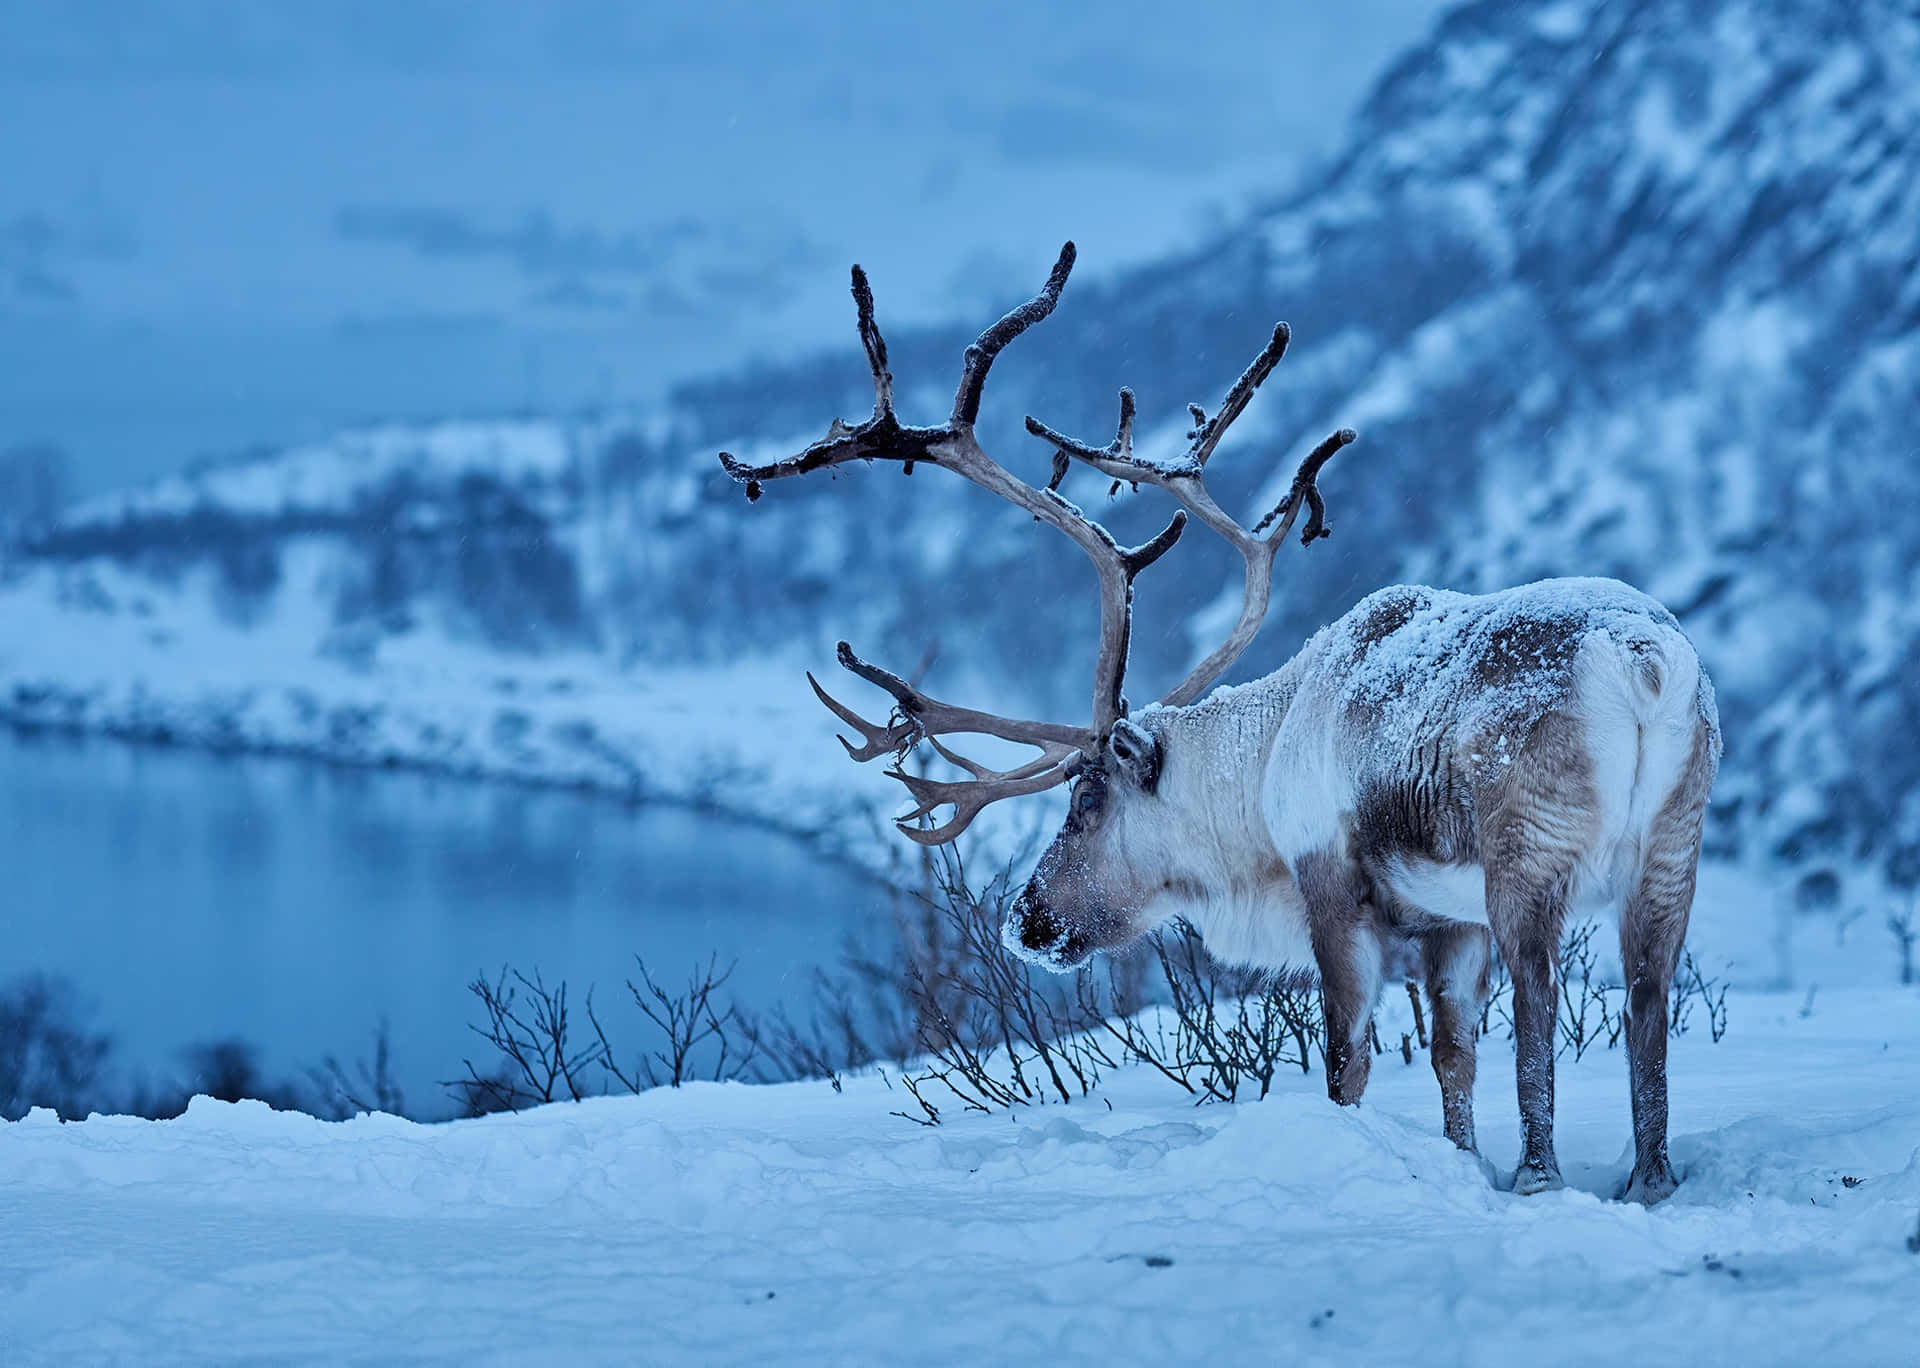 A Red And White Reindeer Standing In A Snowy Forest